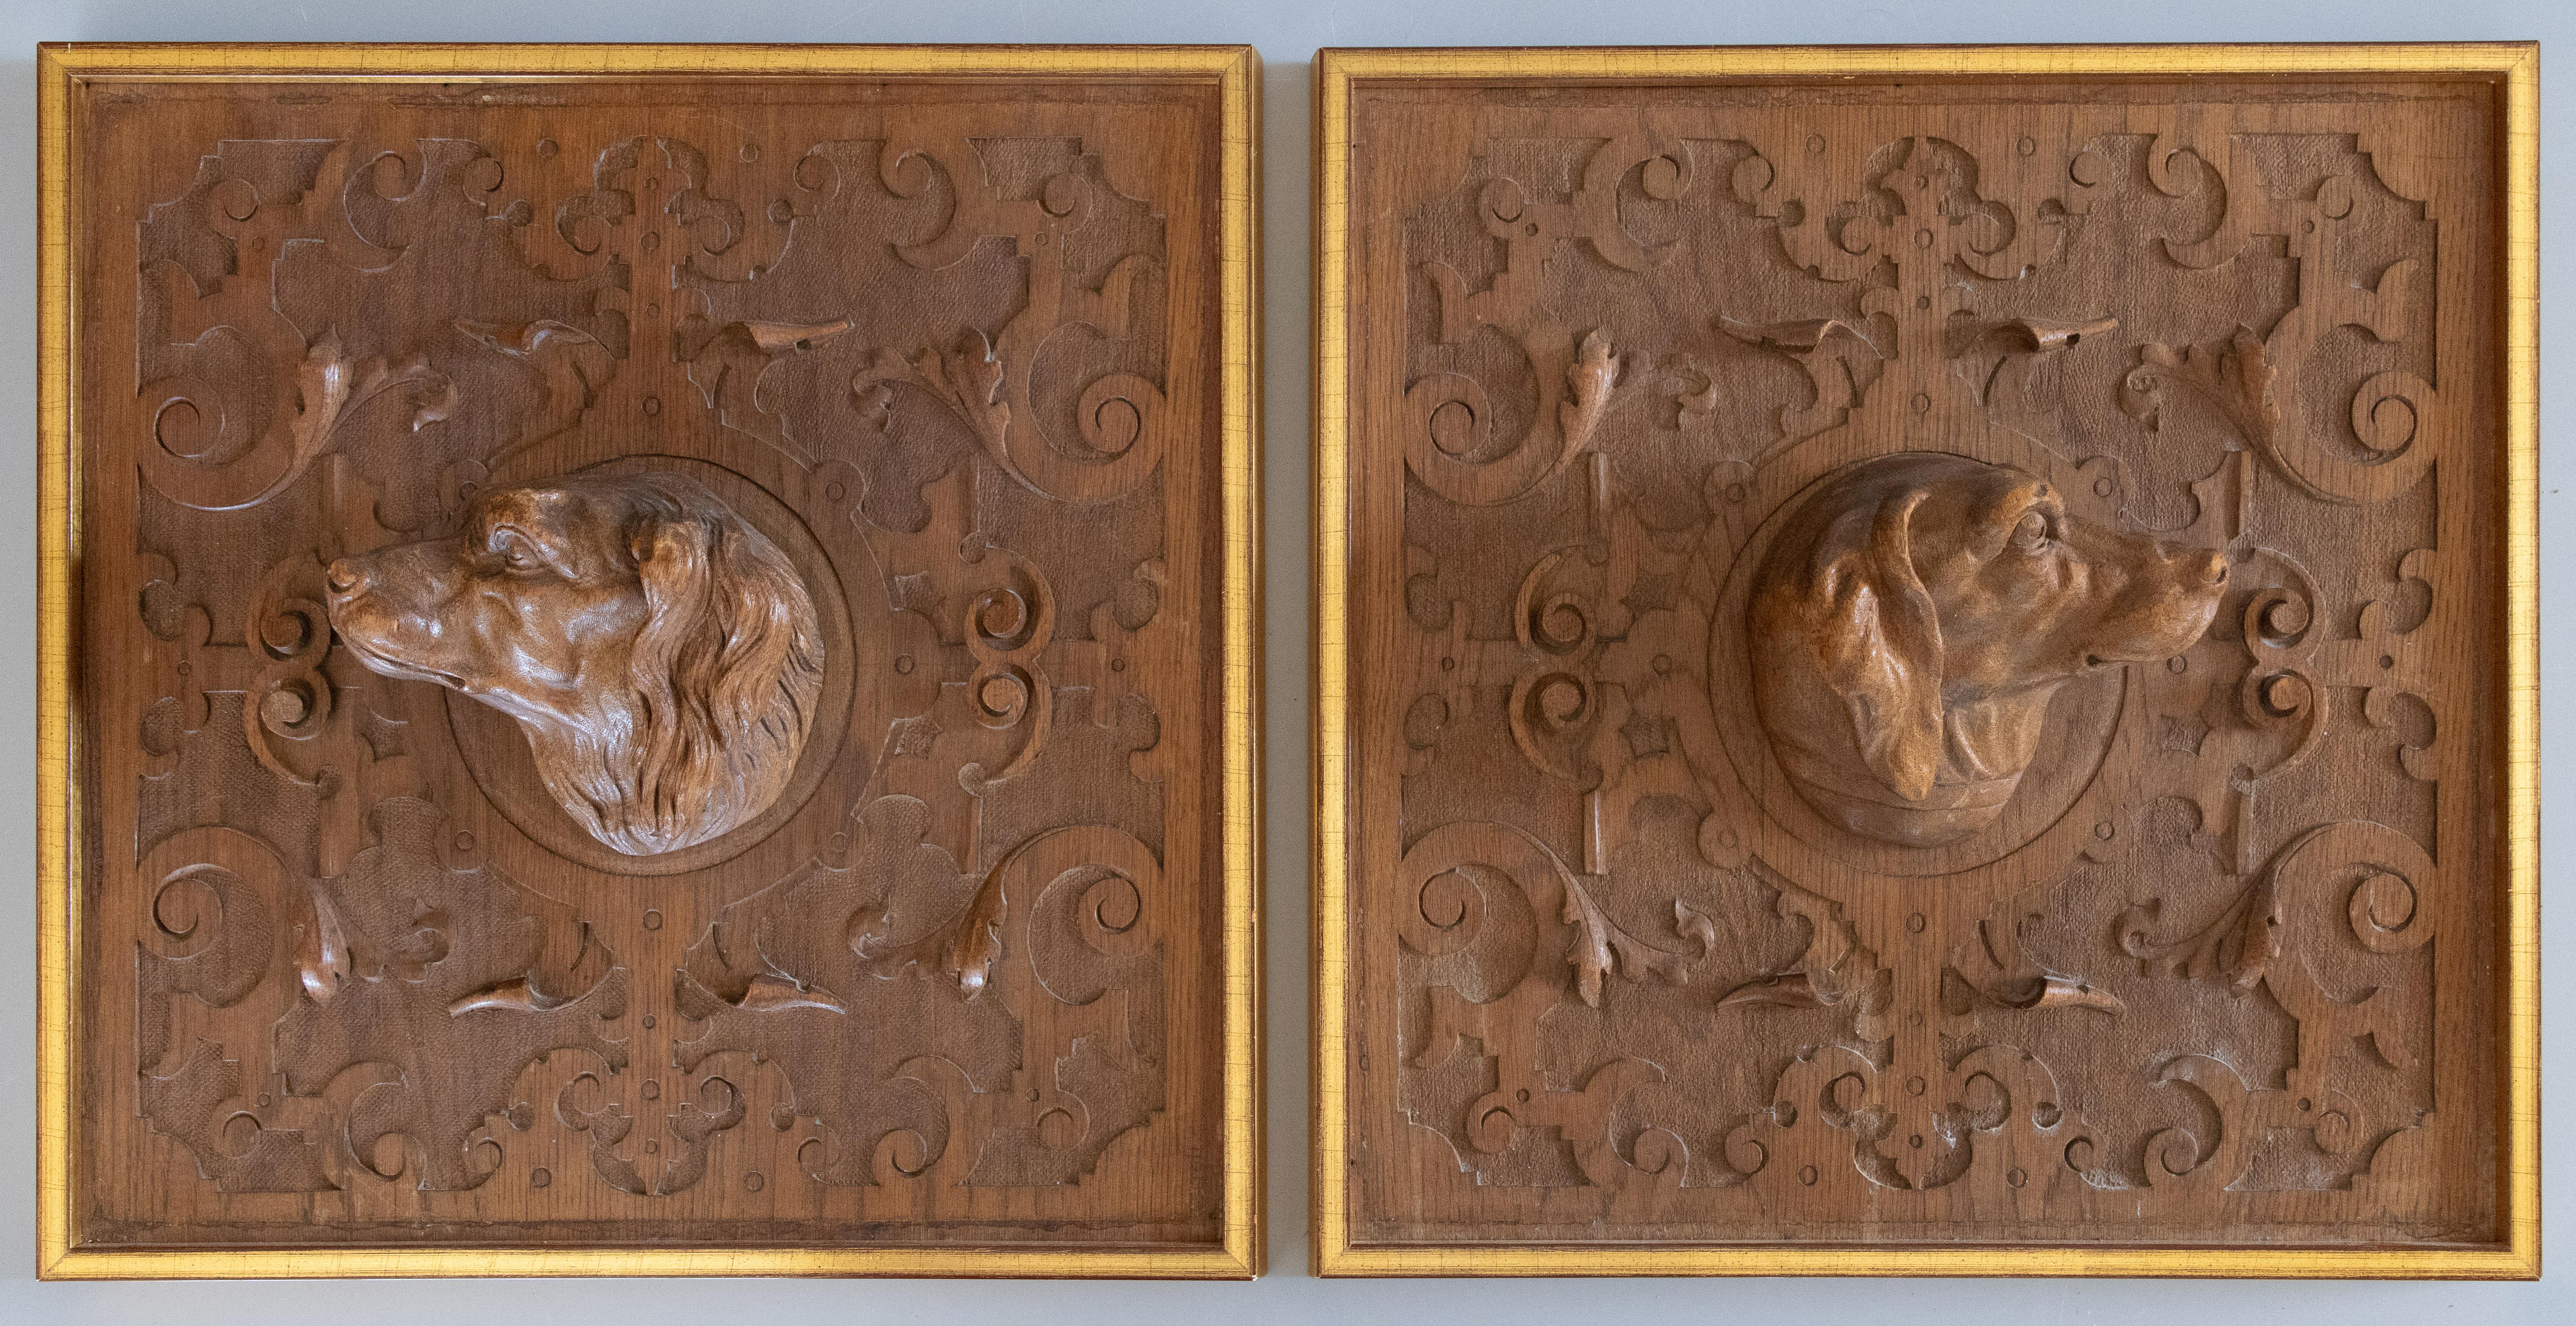 A handsome pair of antique Black Forest hunting dog panels featuring hand carved daschunds in high relief; surrounded by additional ornamental relief. Custom mounted in gold gilt frames. Rare to find a pair in such marvelous